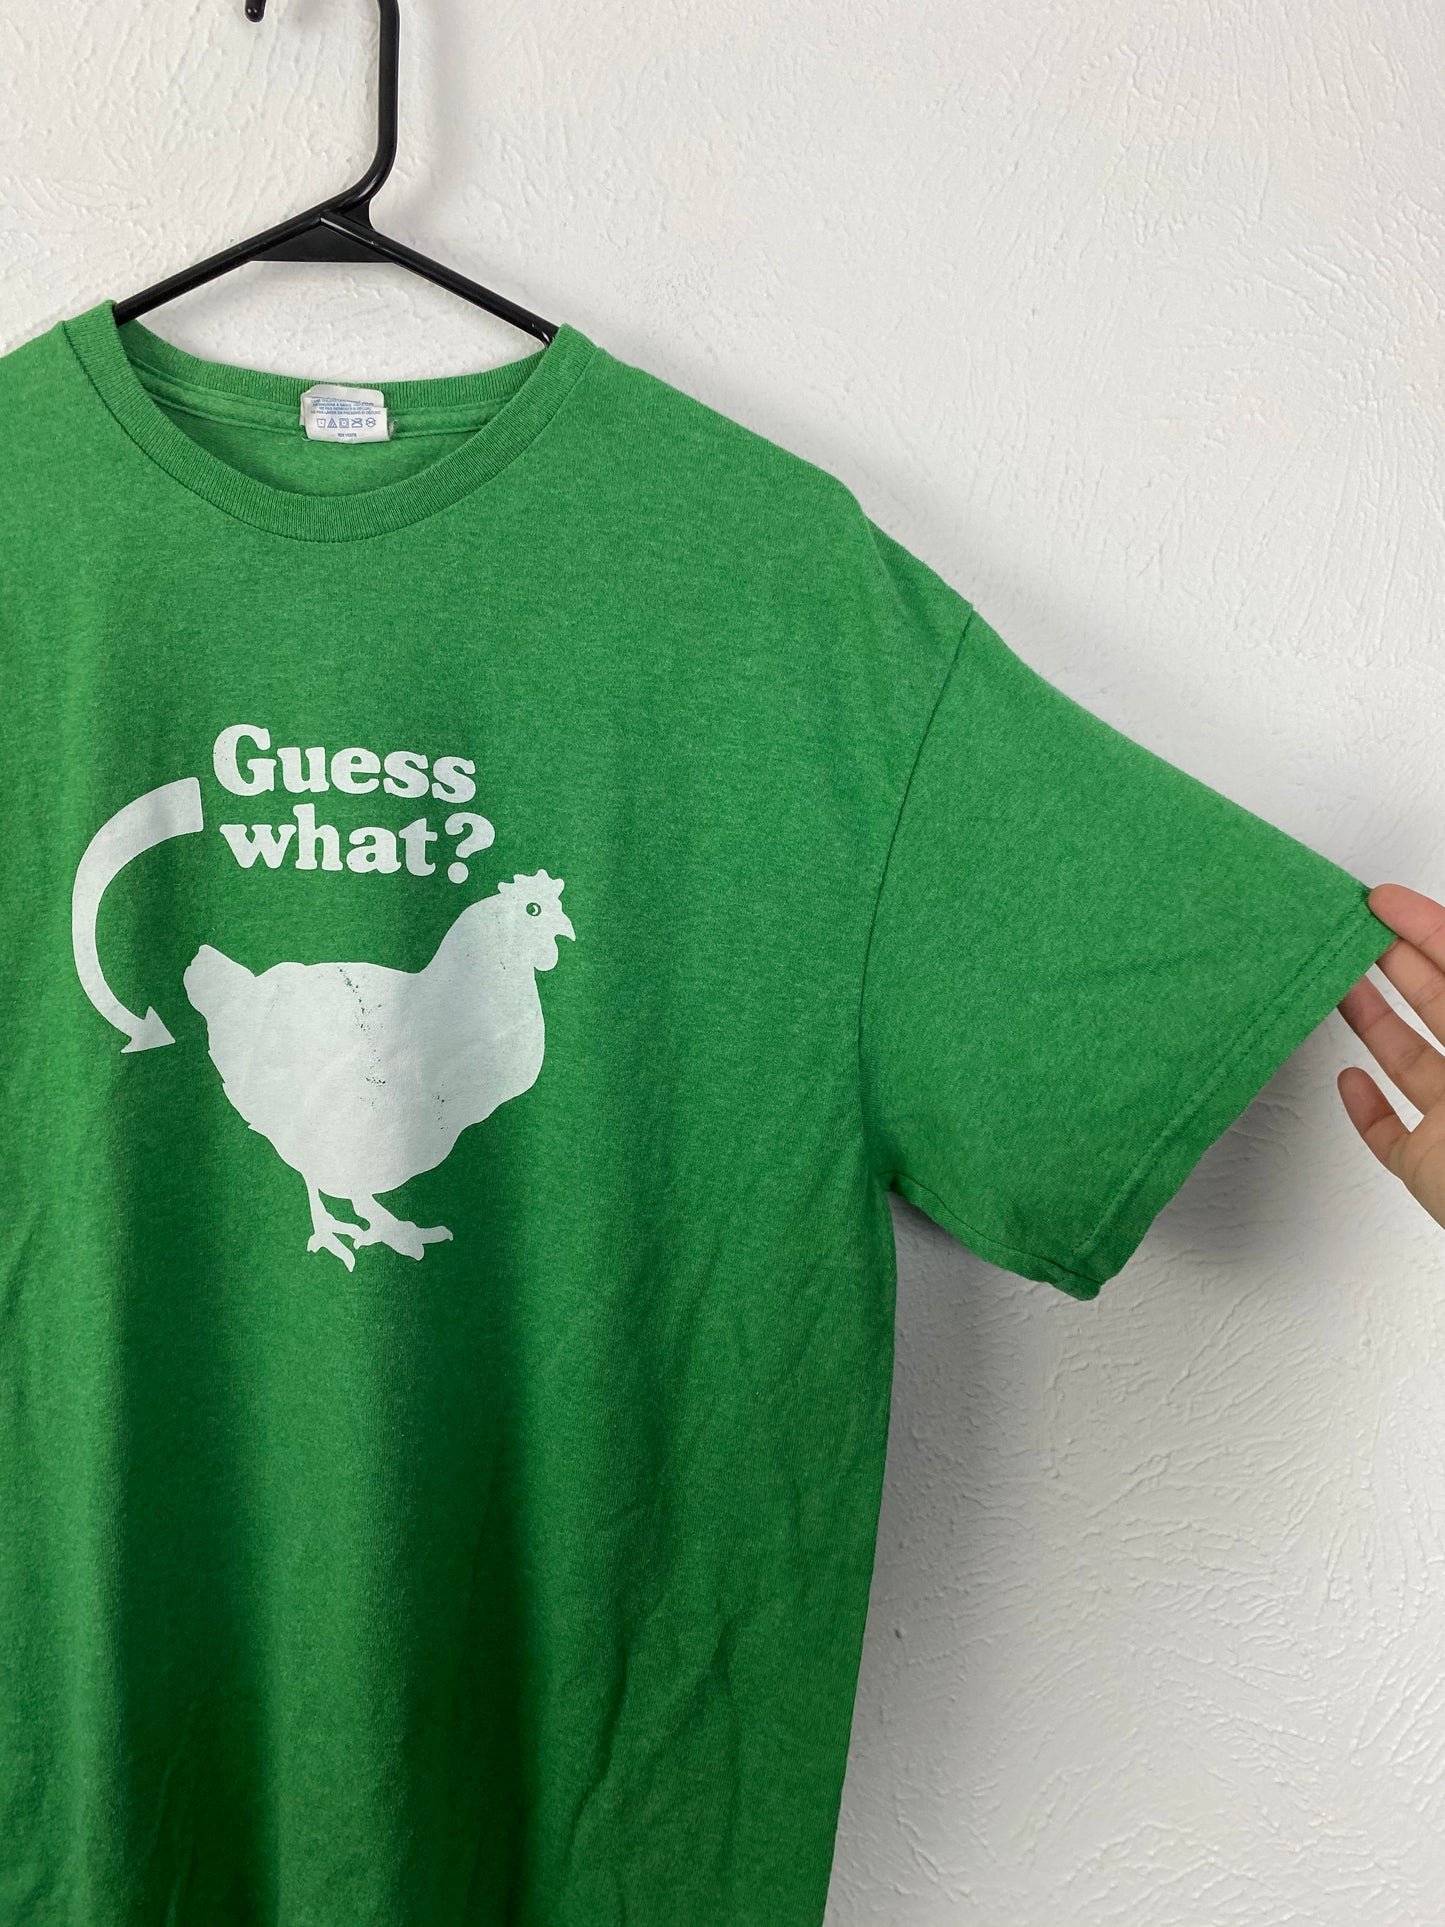 Silly "Guess What?" Graphic Tee Shirt